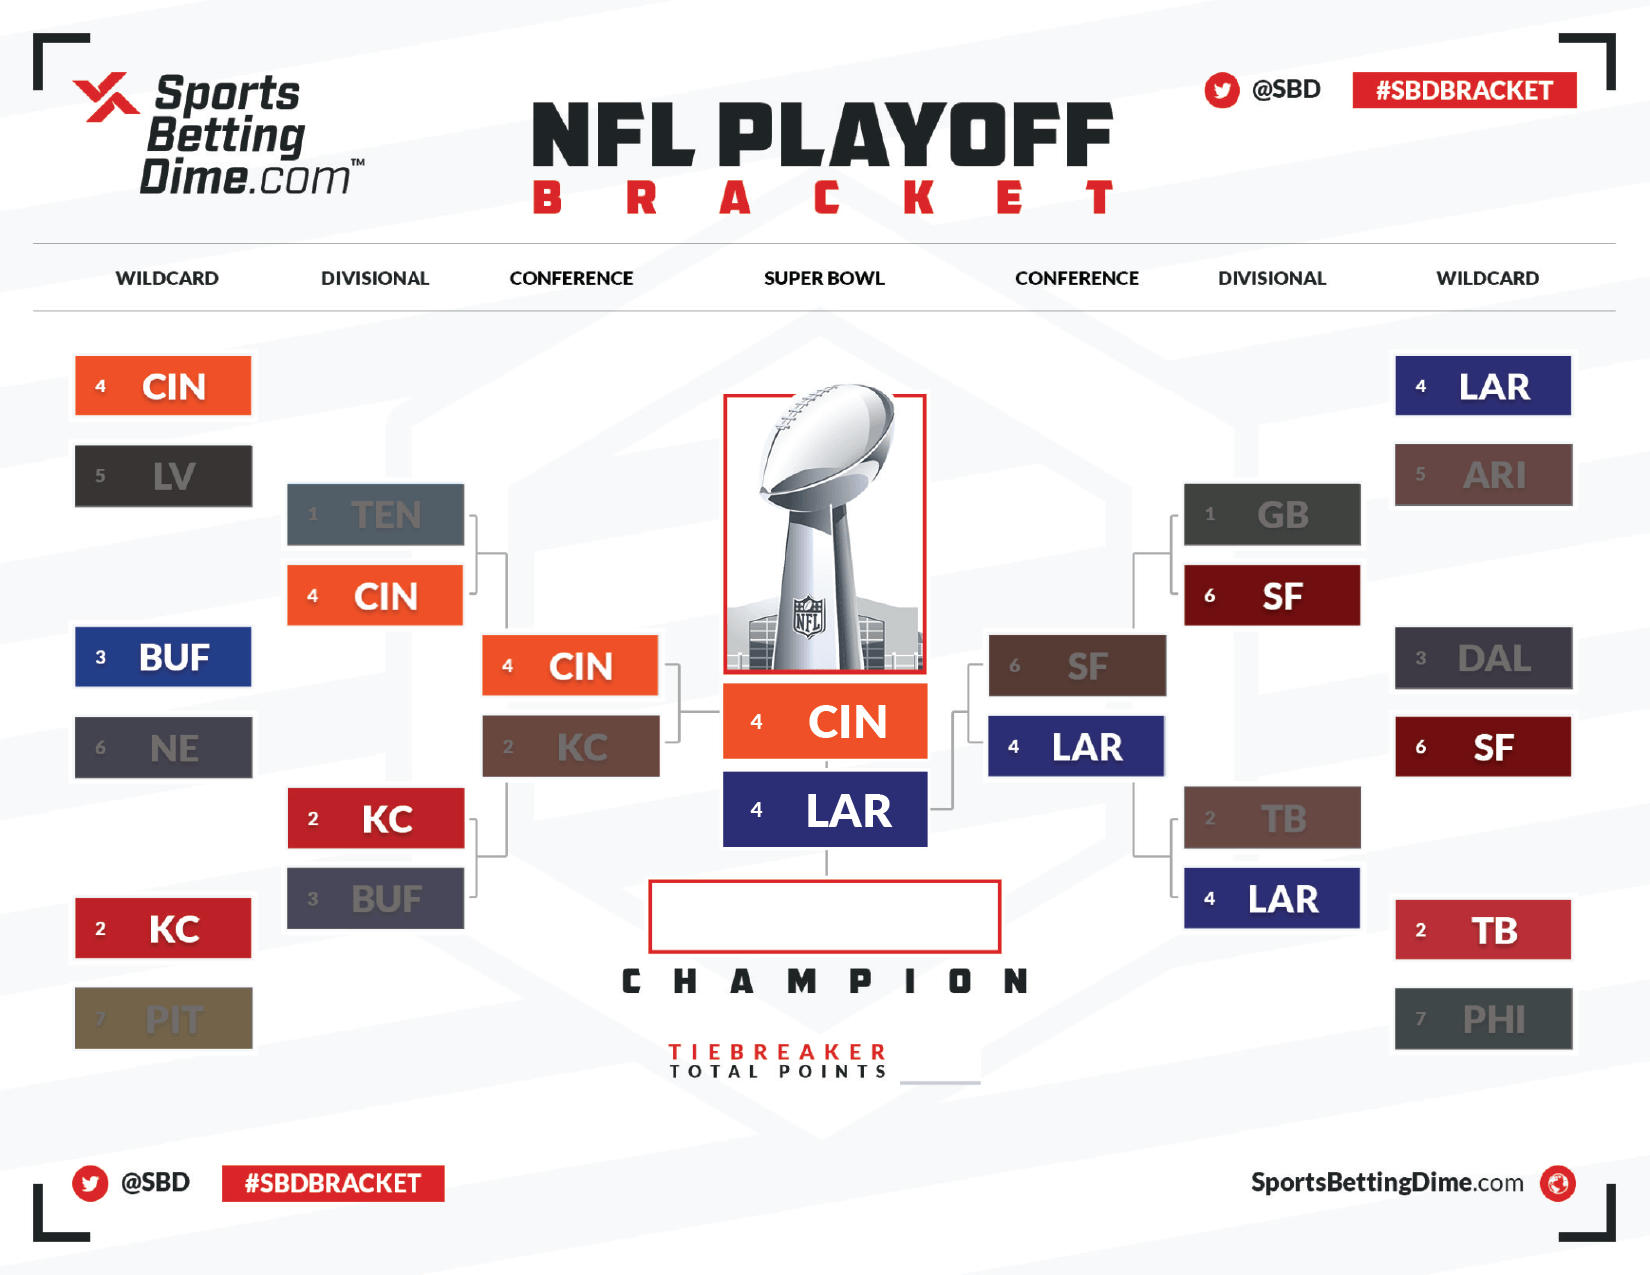 National League Playoff Schedule 2022 2022 Nfl Playoff Bracket - Conference Championship Matchups And Schedule